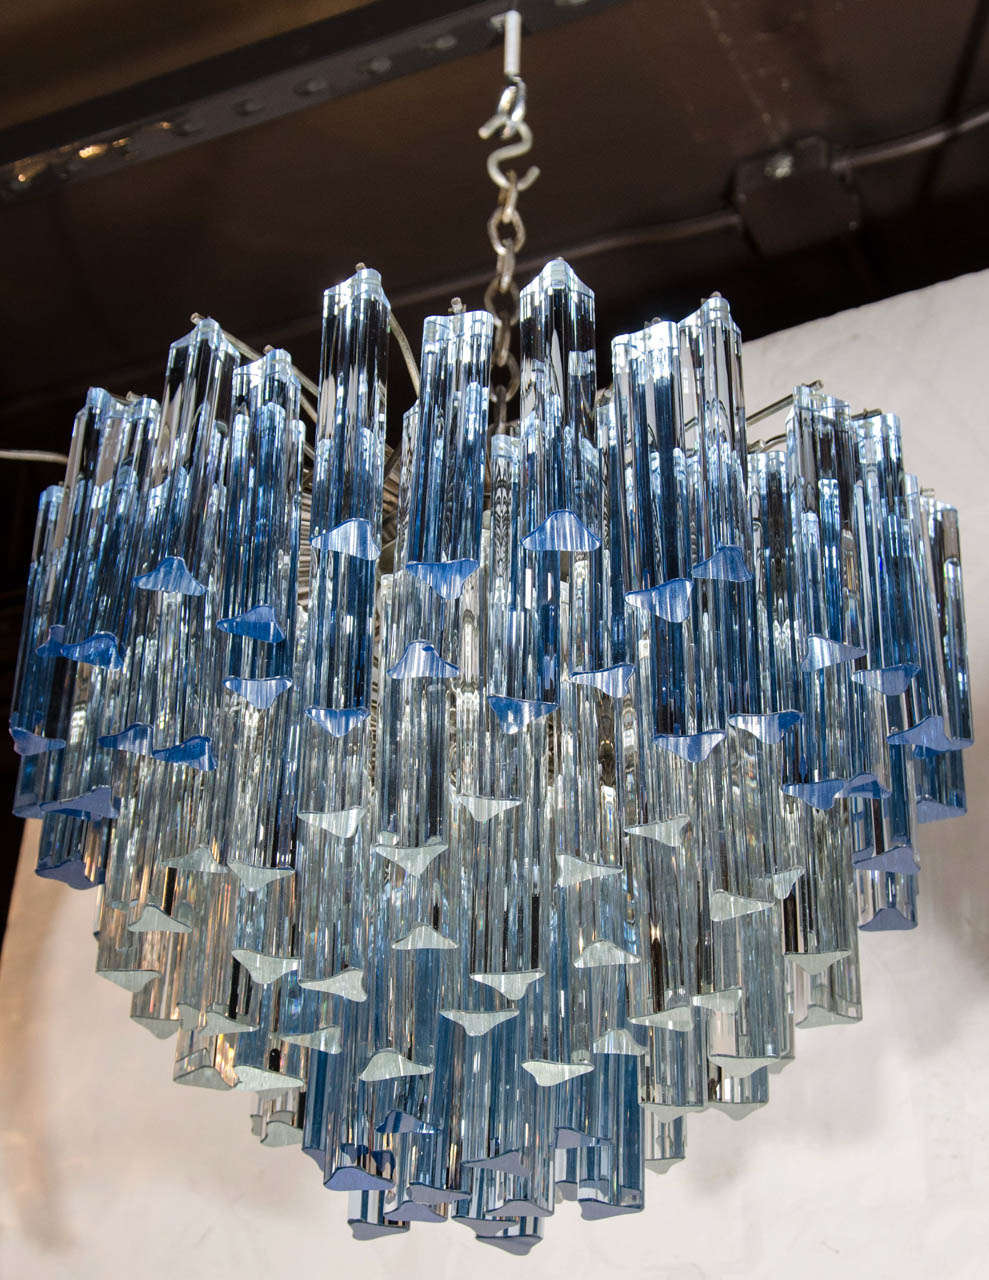 Stunning chandelier comprised of a multi tiered chrome frame with hundreds of Murano glass crystal prisms hanging at varying heights.  The crystal prisms are hand blown and have stylized triangular forms in both clear crystal and gradient hues of